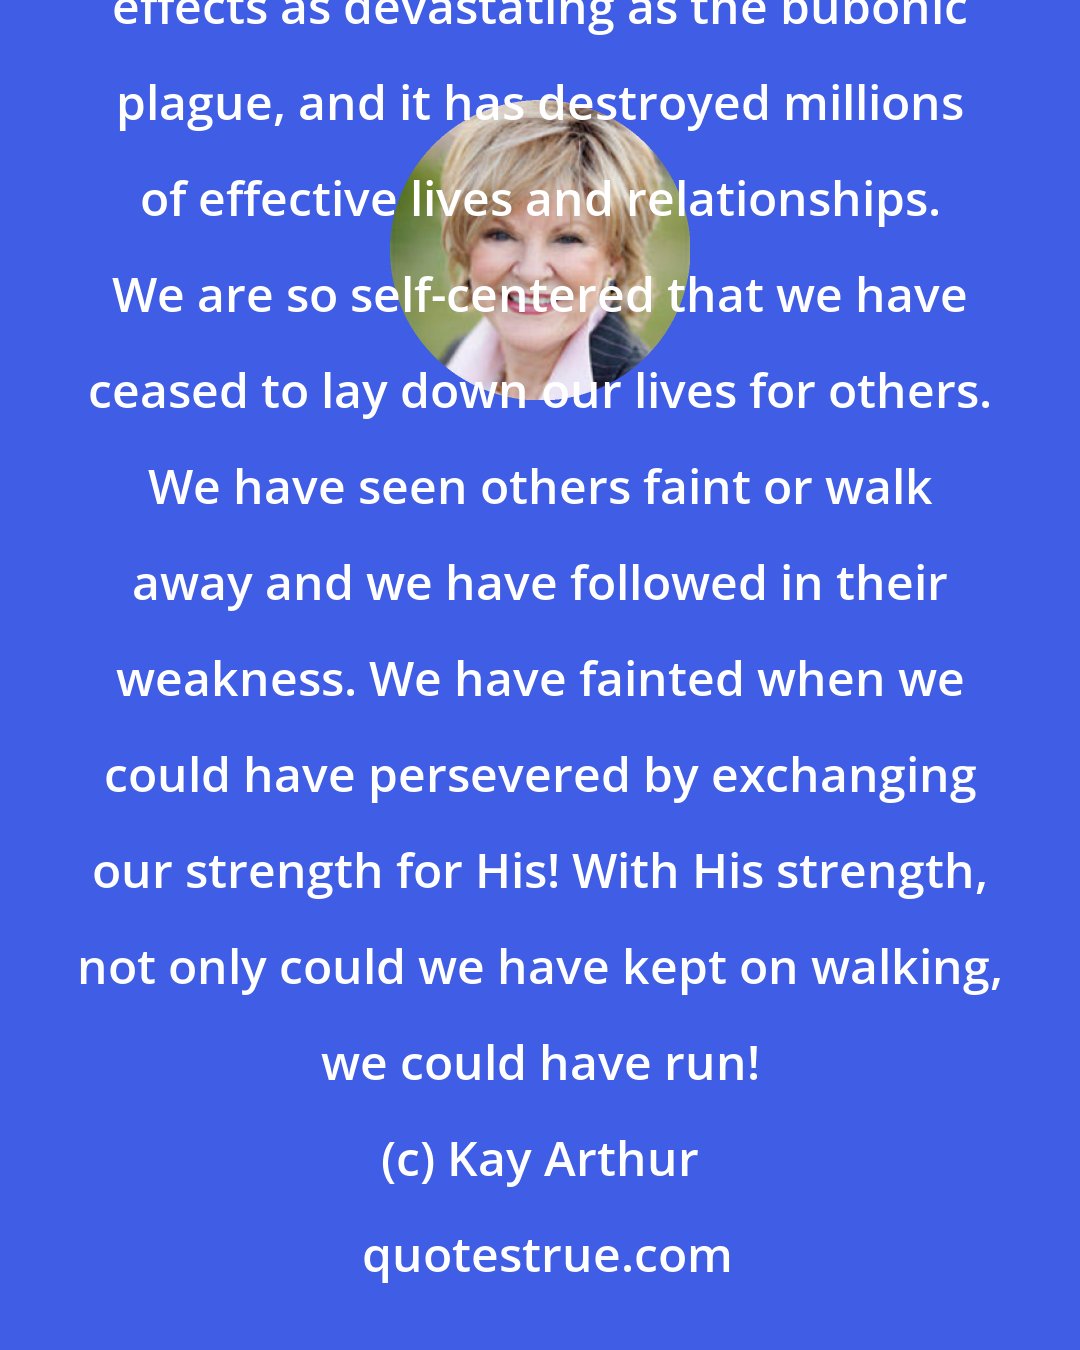 Kay Arthur: Our society is filled with runaways, dropouts, and quitters. The epidemic of walking away has hit our land with effects as devastating as the bubonic plague, and it has destroyed millions of effective lives and relationships. We are so self-centered that we have ceased to lay down our lives for others. We have seen others faint or walk away and we have followed in their weakness. We have fainted when we could have persevered by exchanging our strength for His! With His strength, not only could we have kept on walking, we could have run!